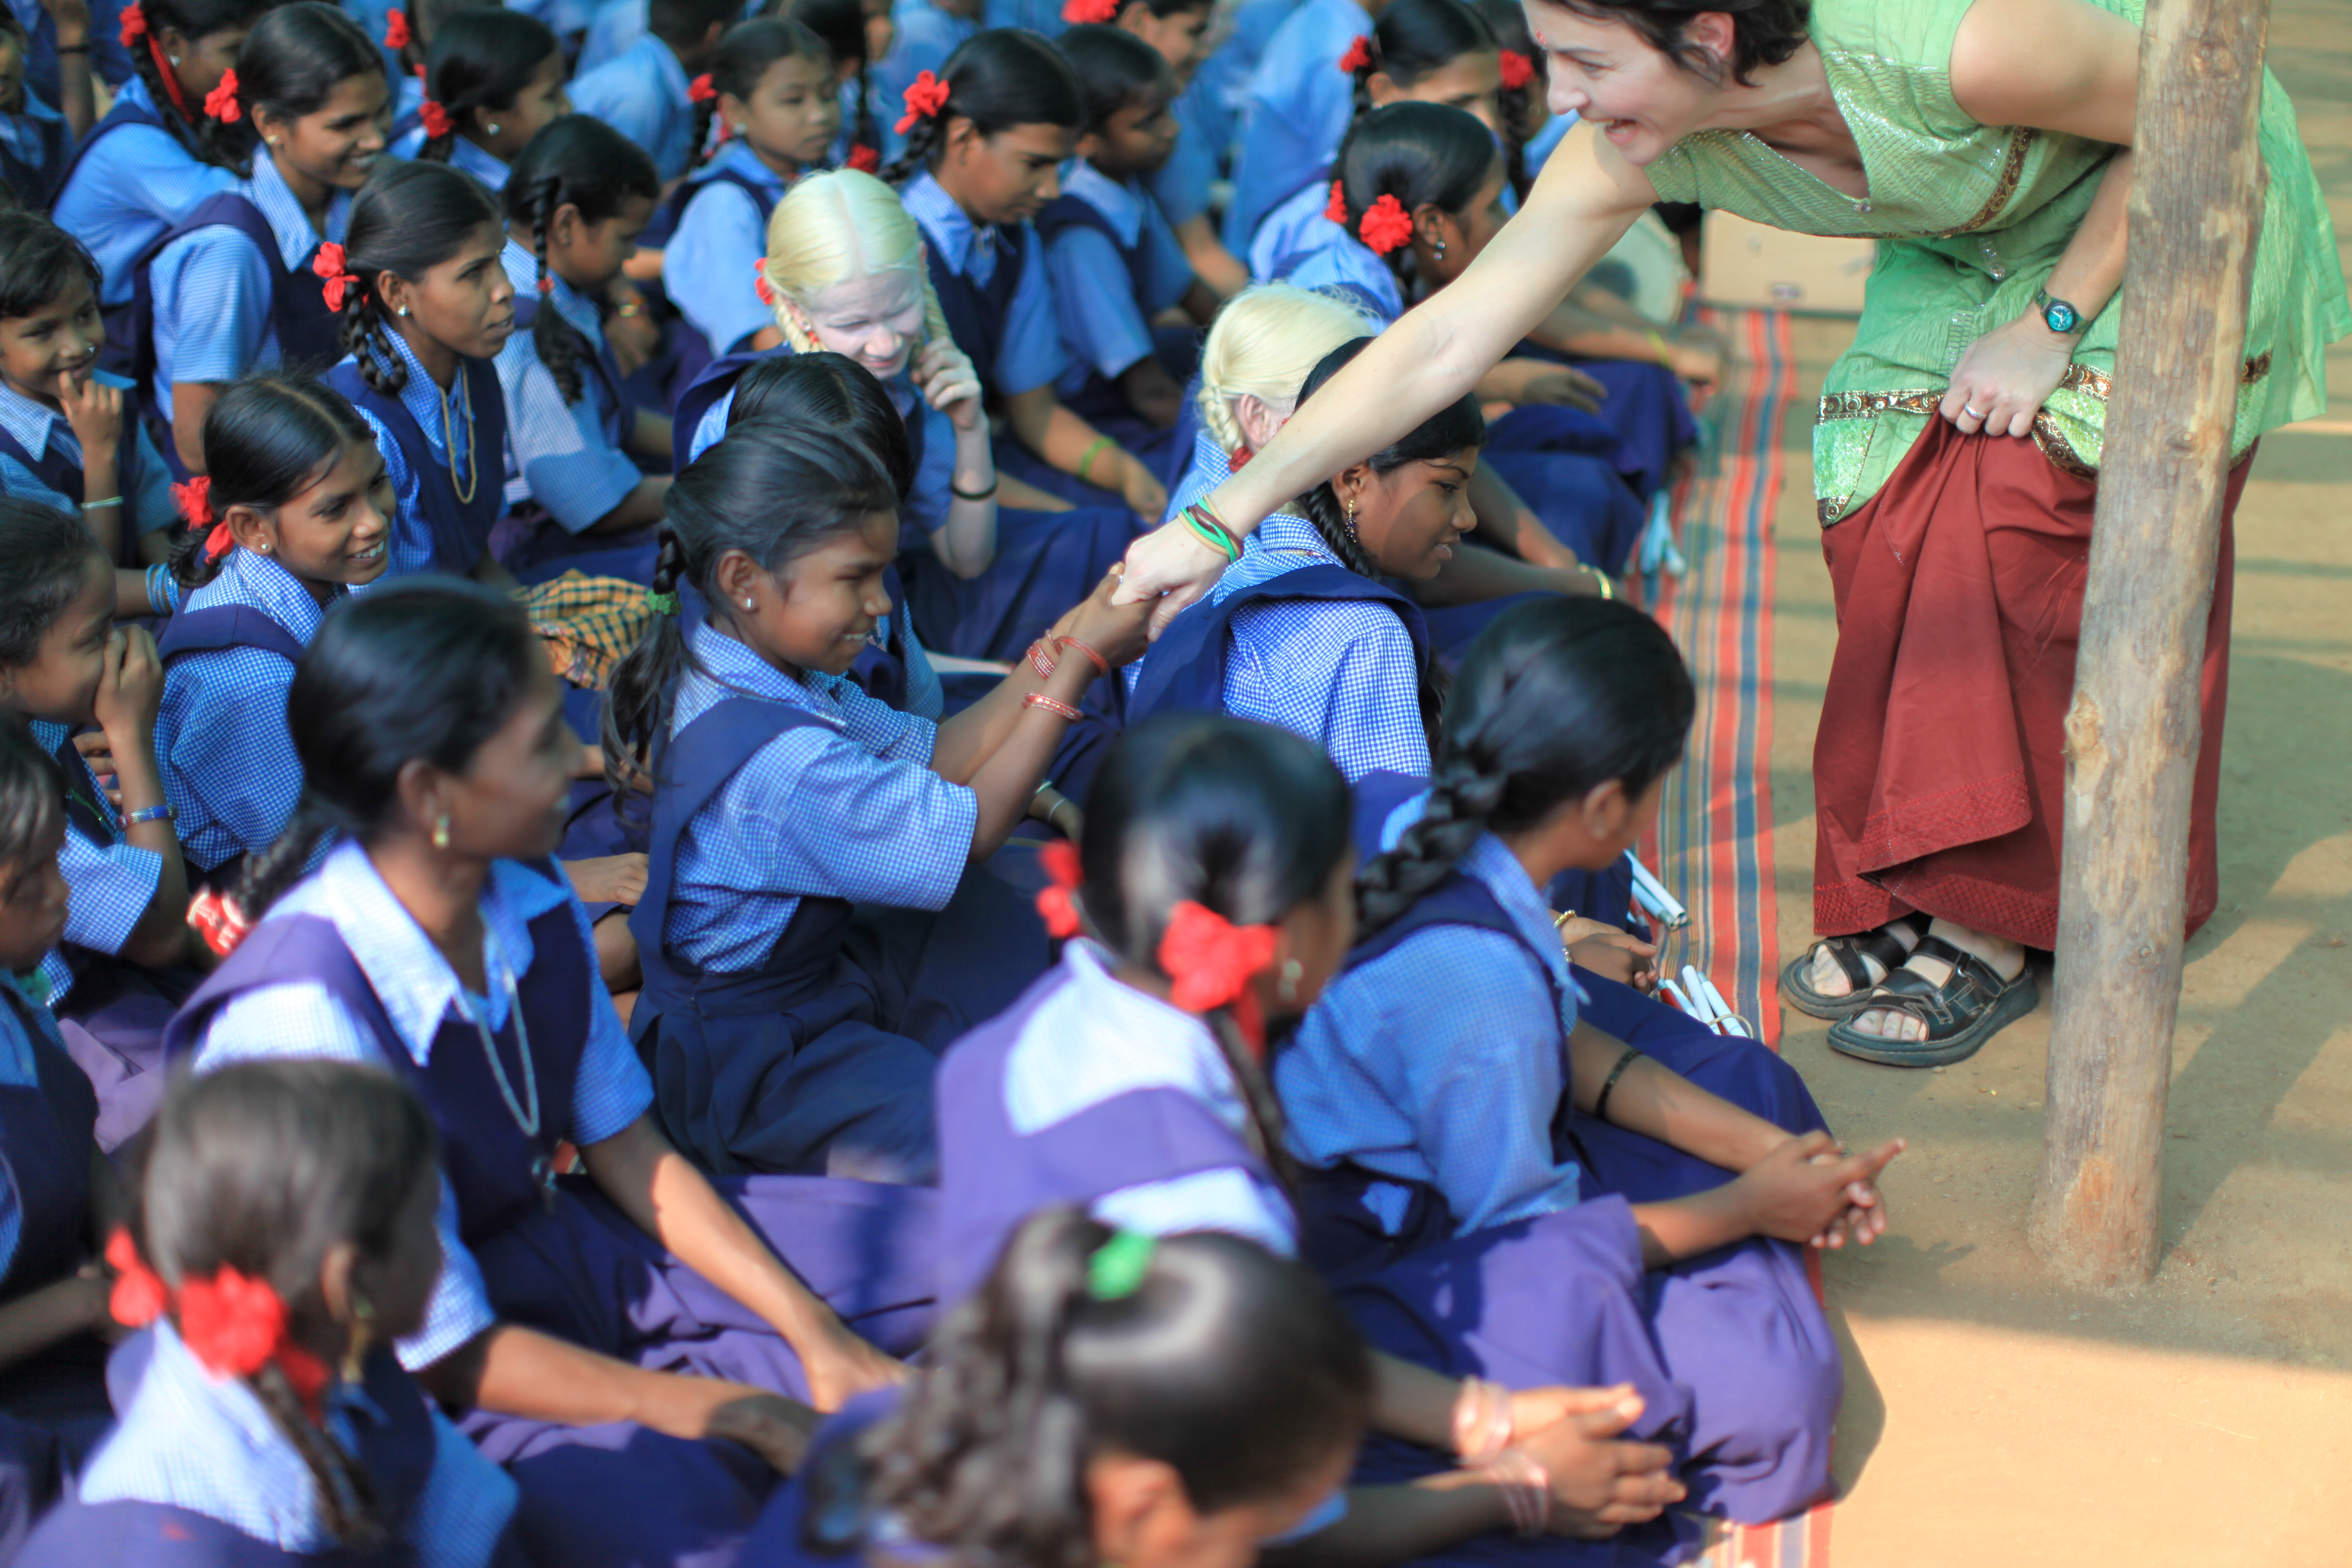 producing a video about the Manav Kalyan Trust schools for disabled children in India